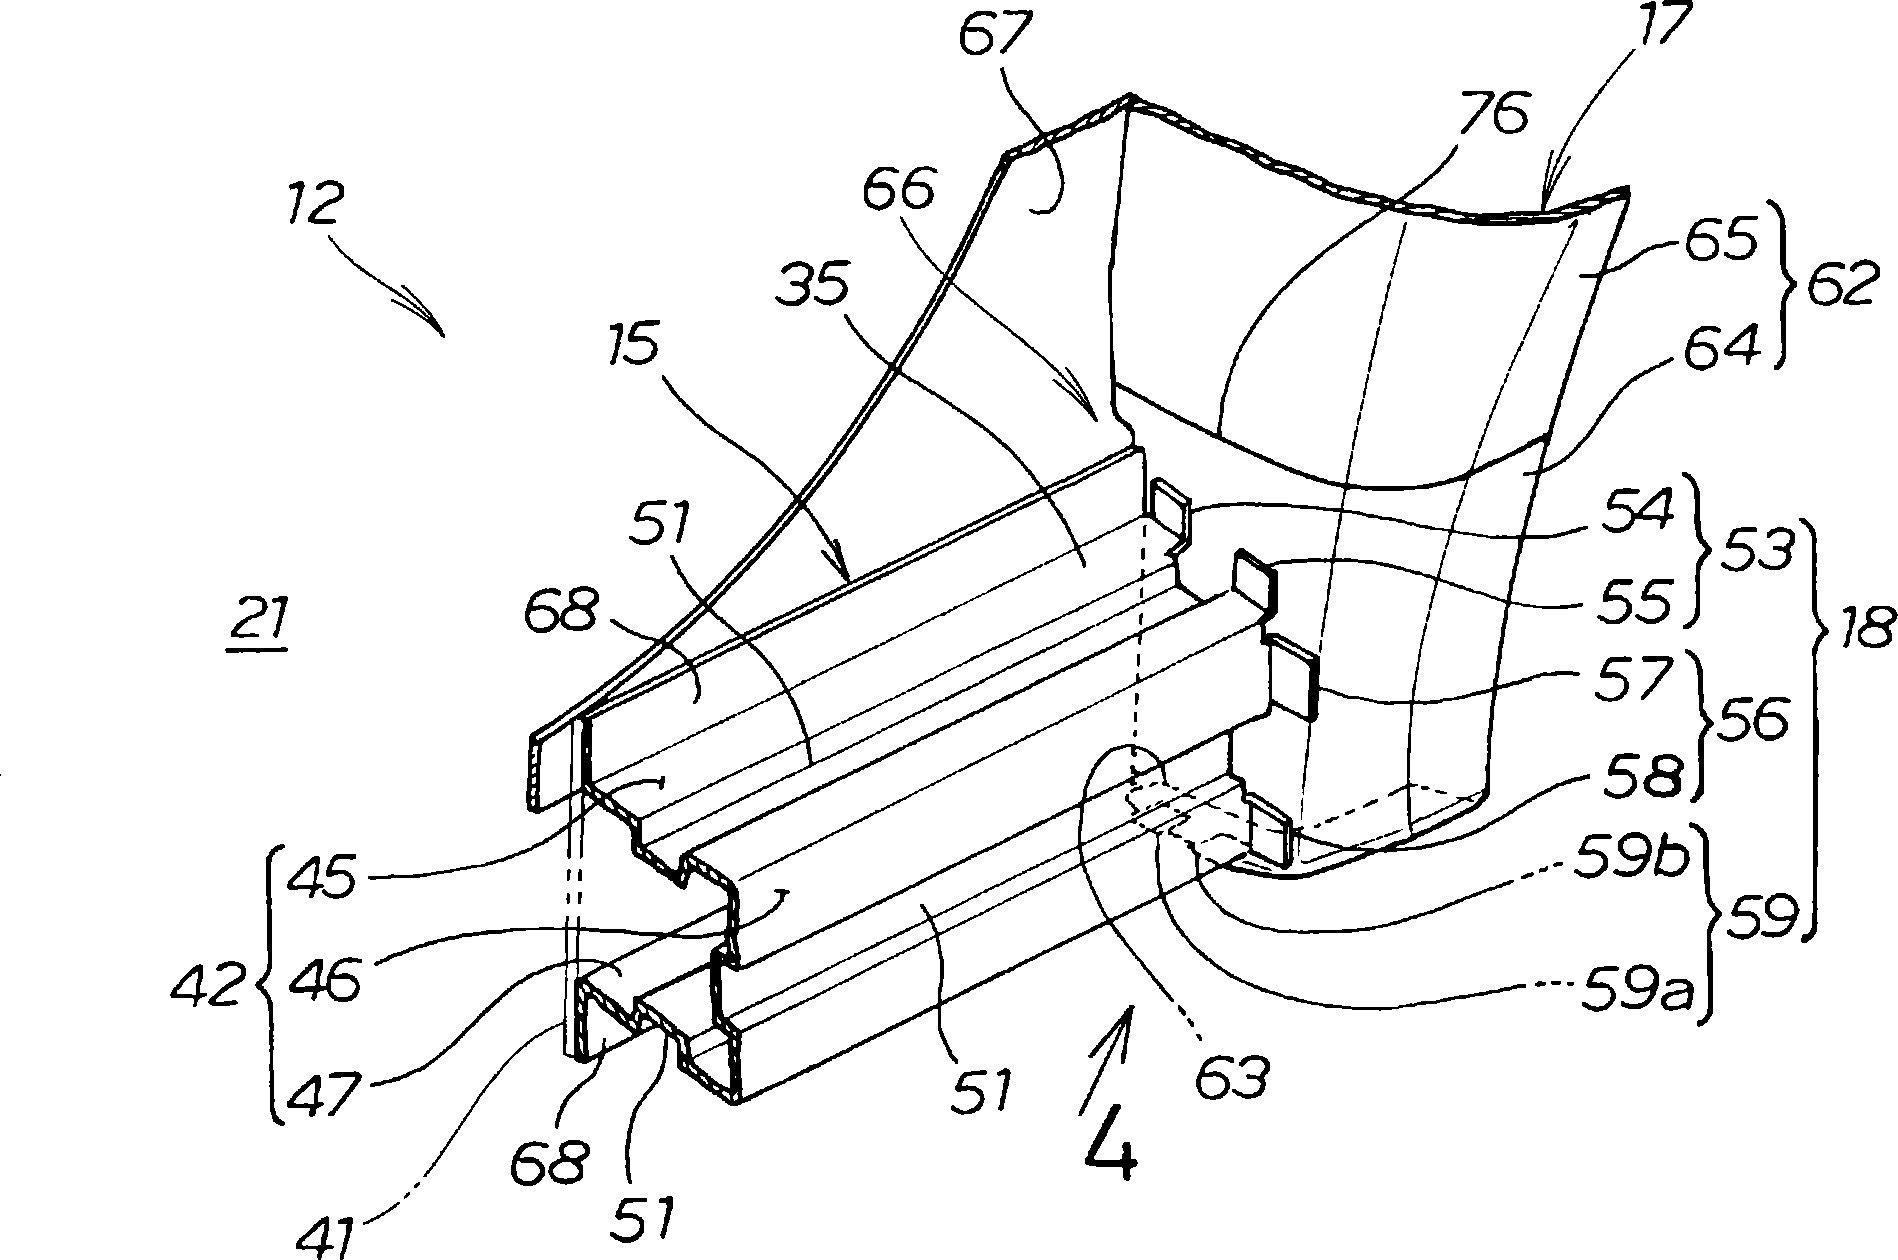 Structure for side section of vehicle body